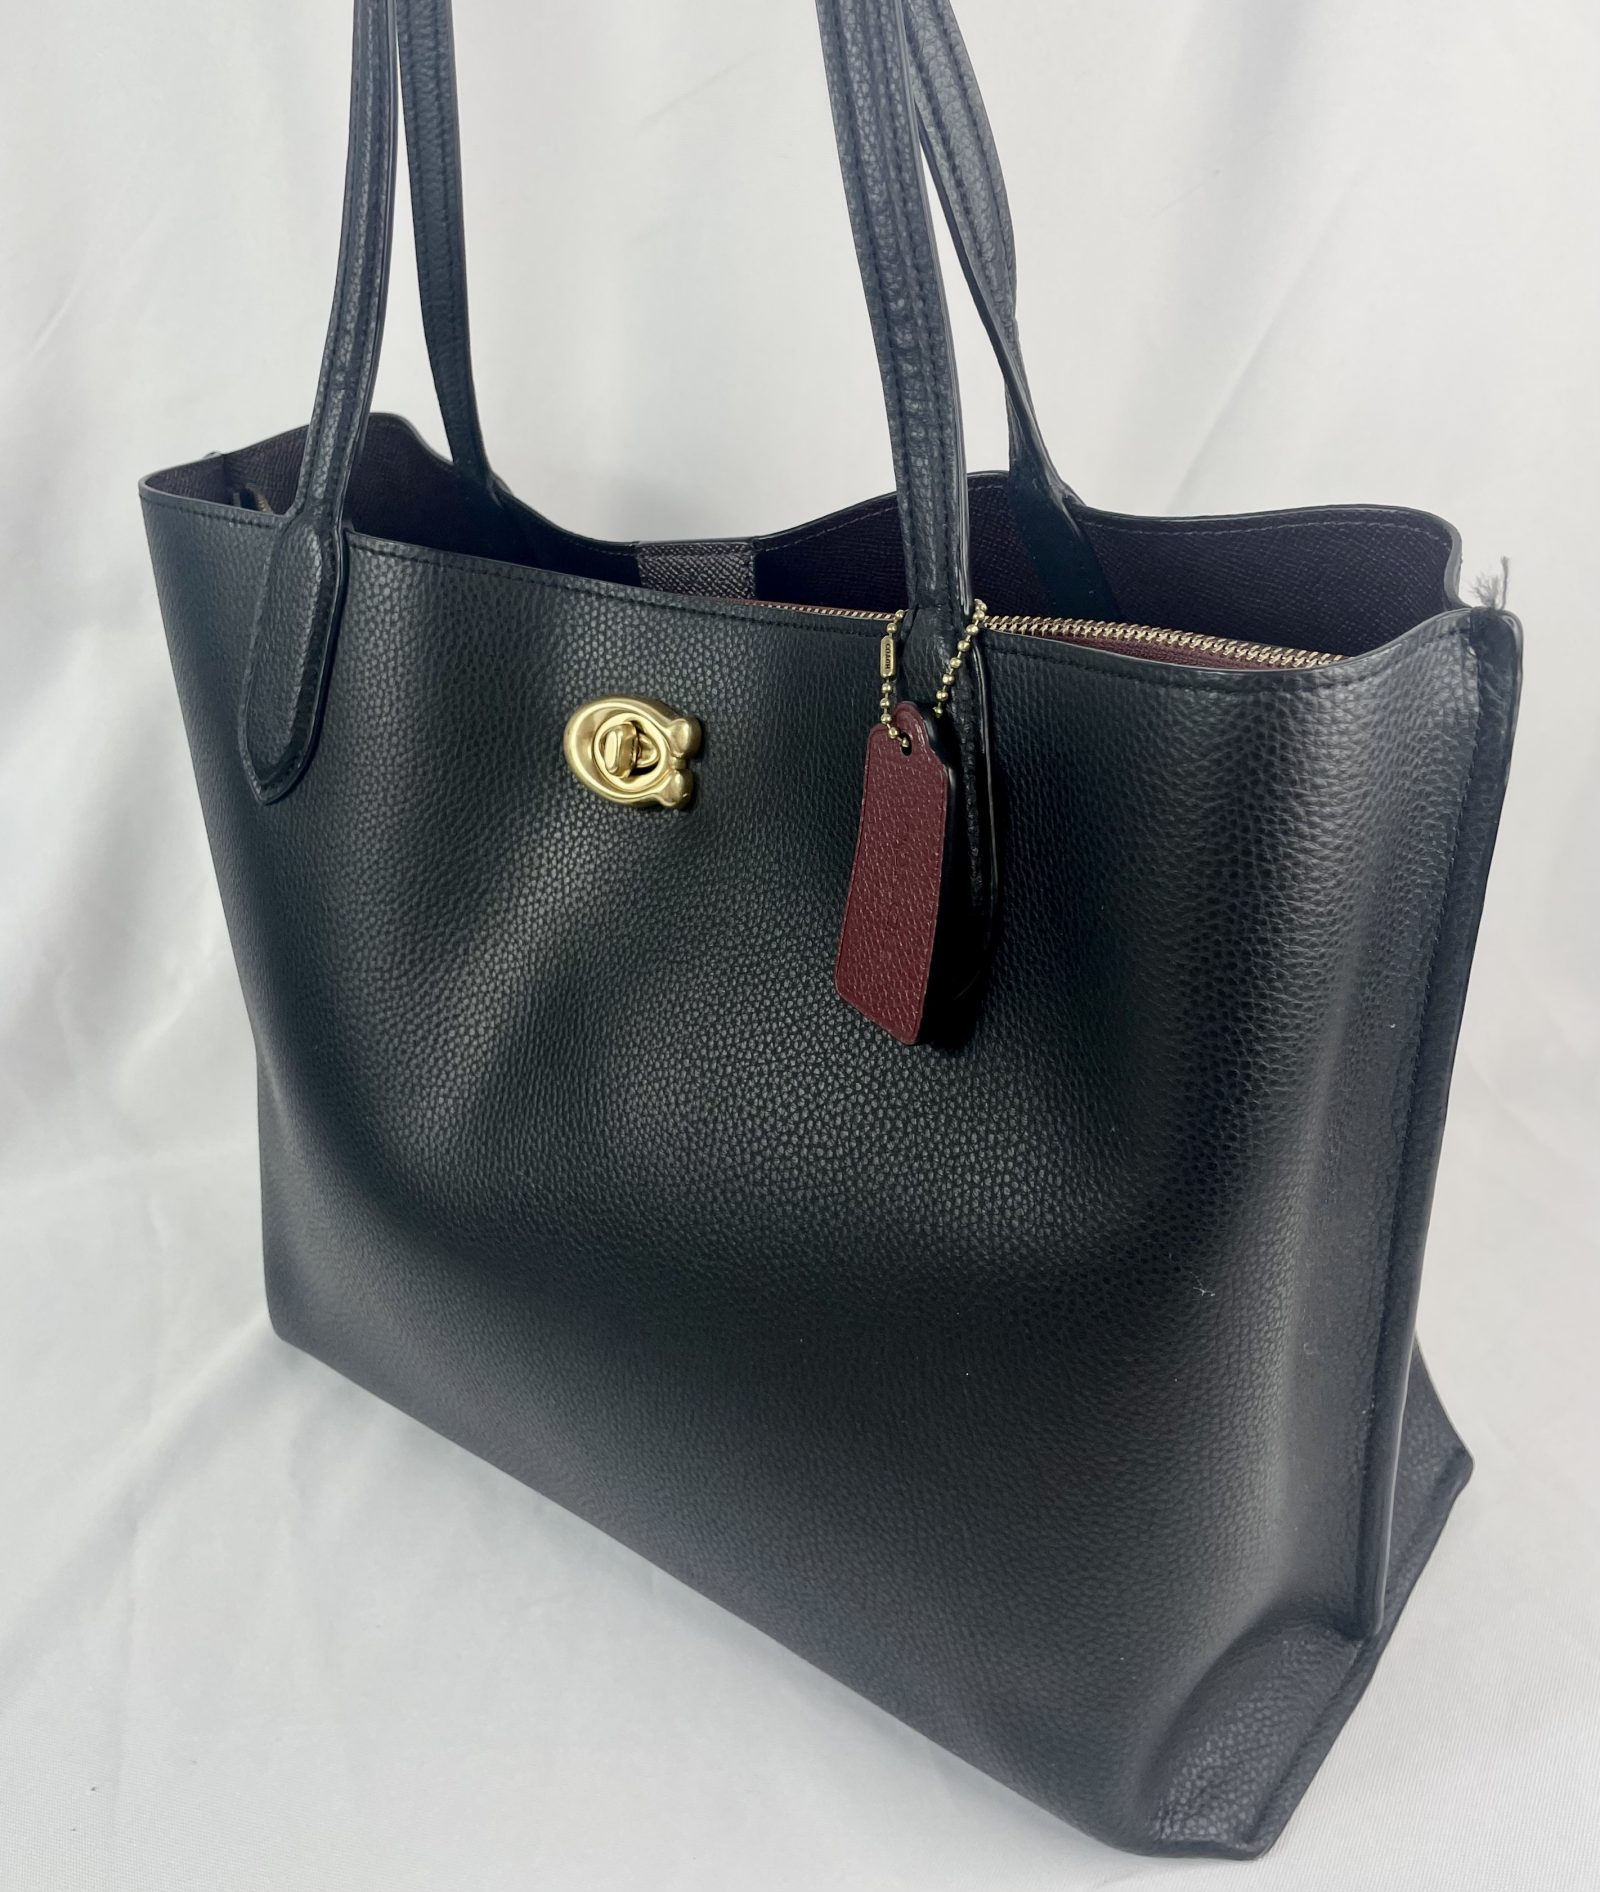 Preowned leather Coach tote bag